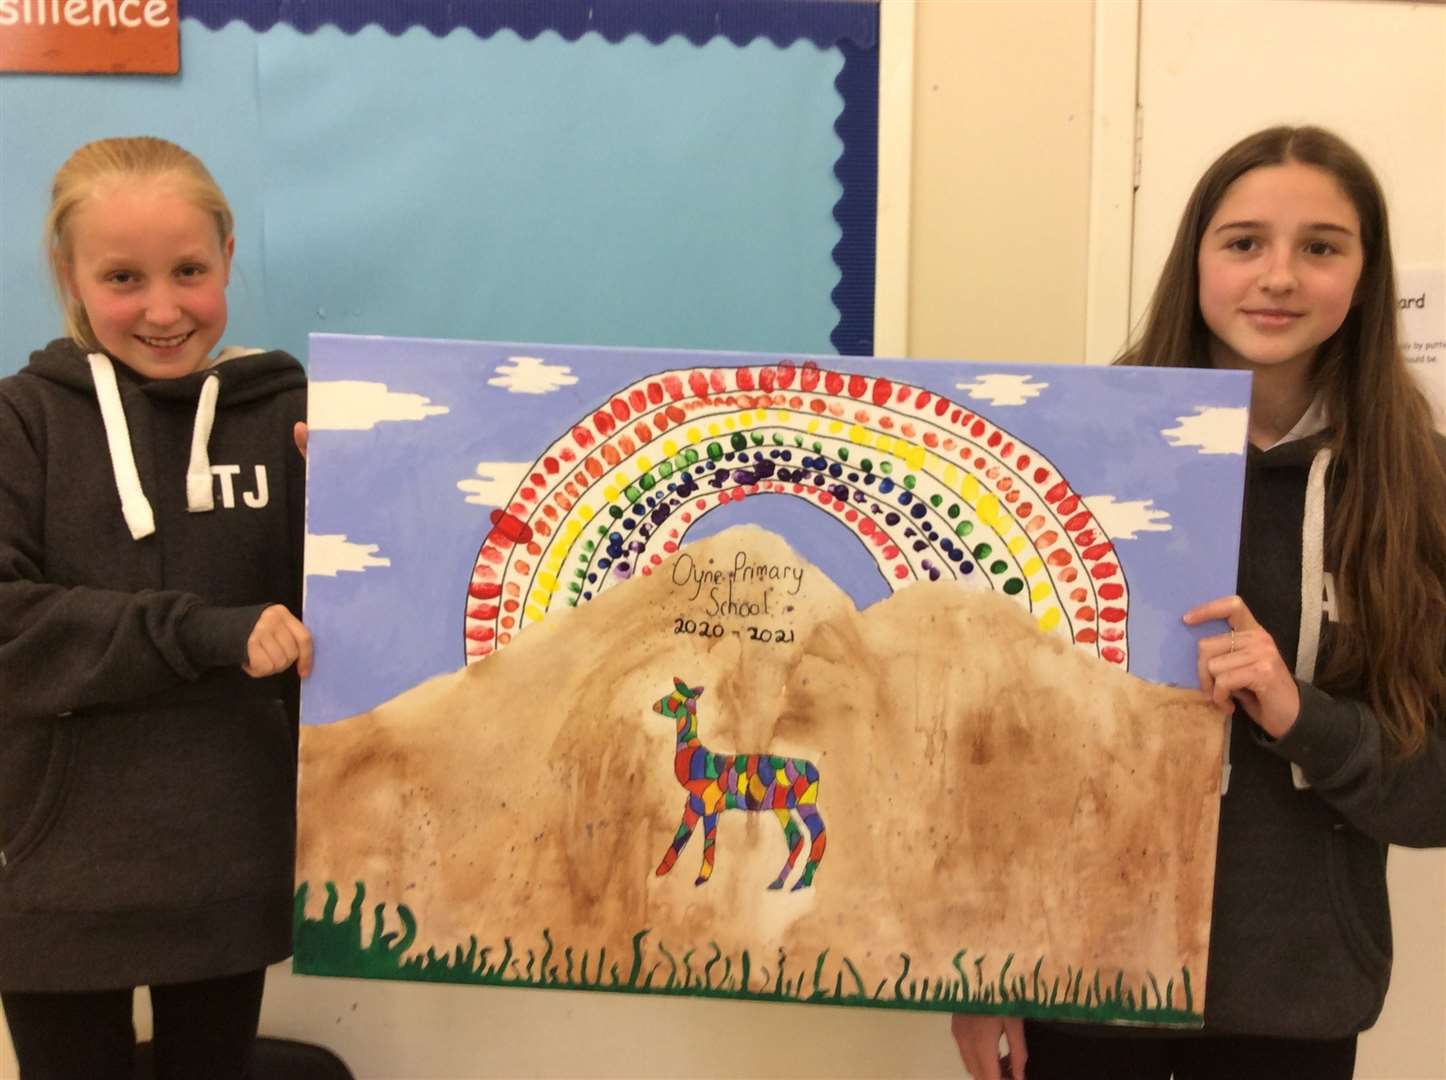 Oyne School P7 pupils Tilly James and Amy Erbe with the painted rainbow which is made up of fingerprints of each pupil at the school.